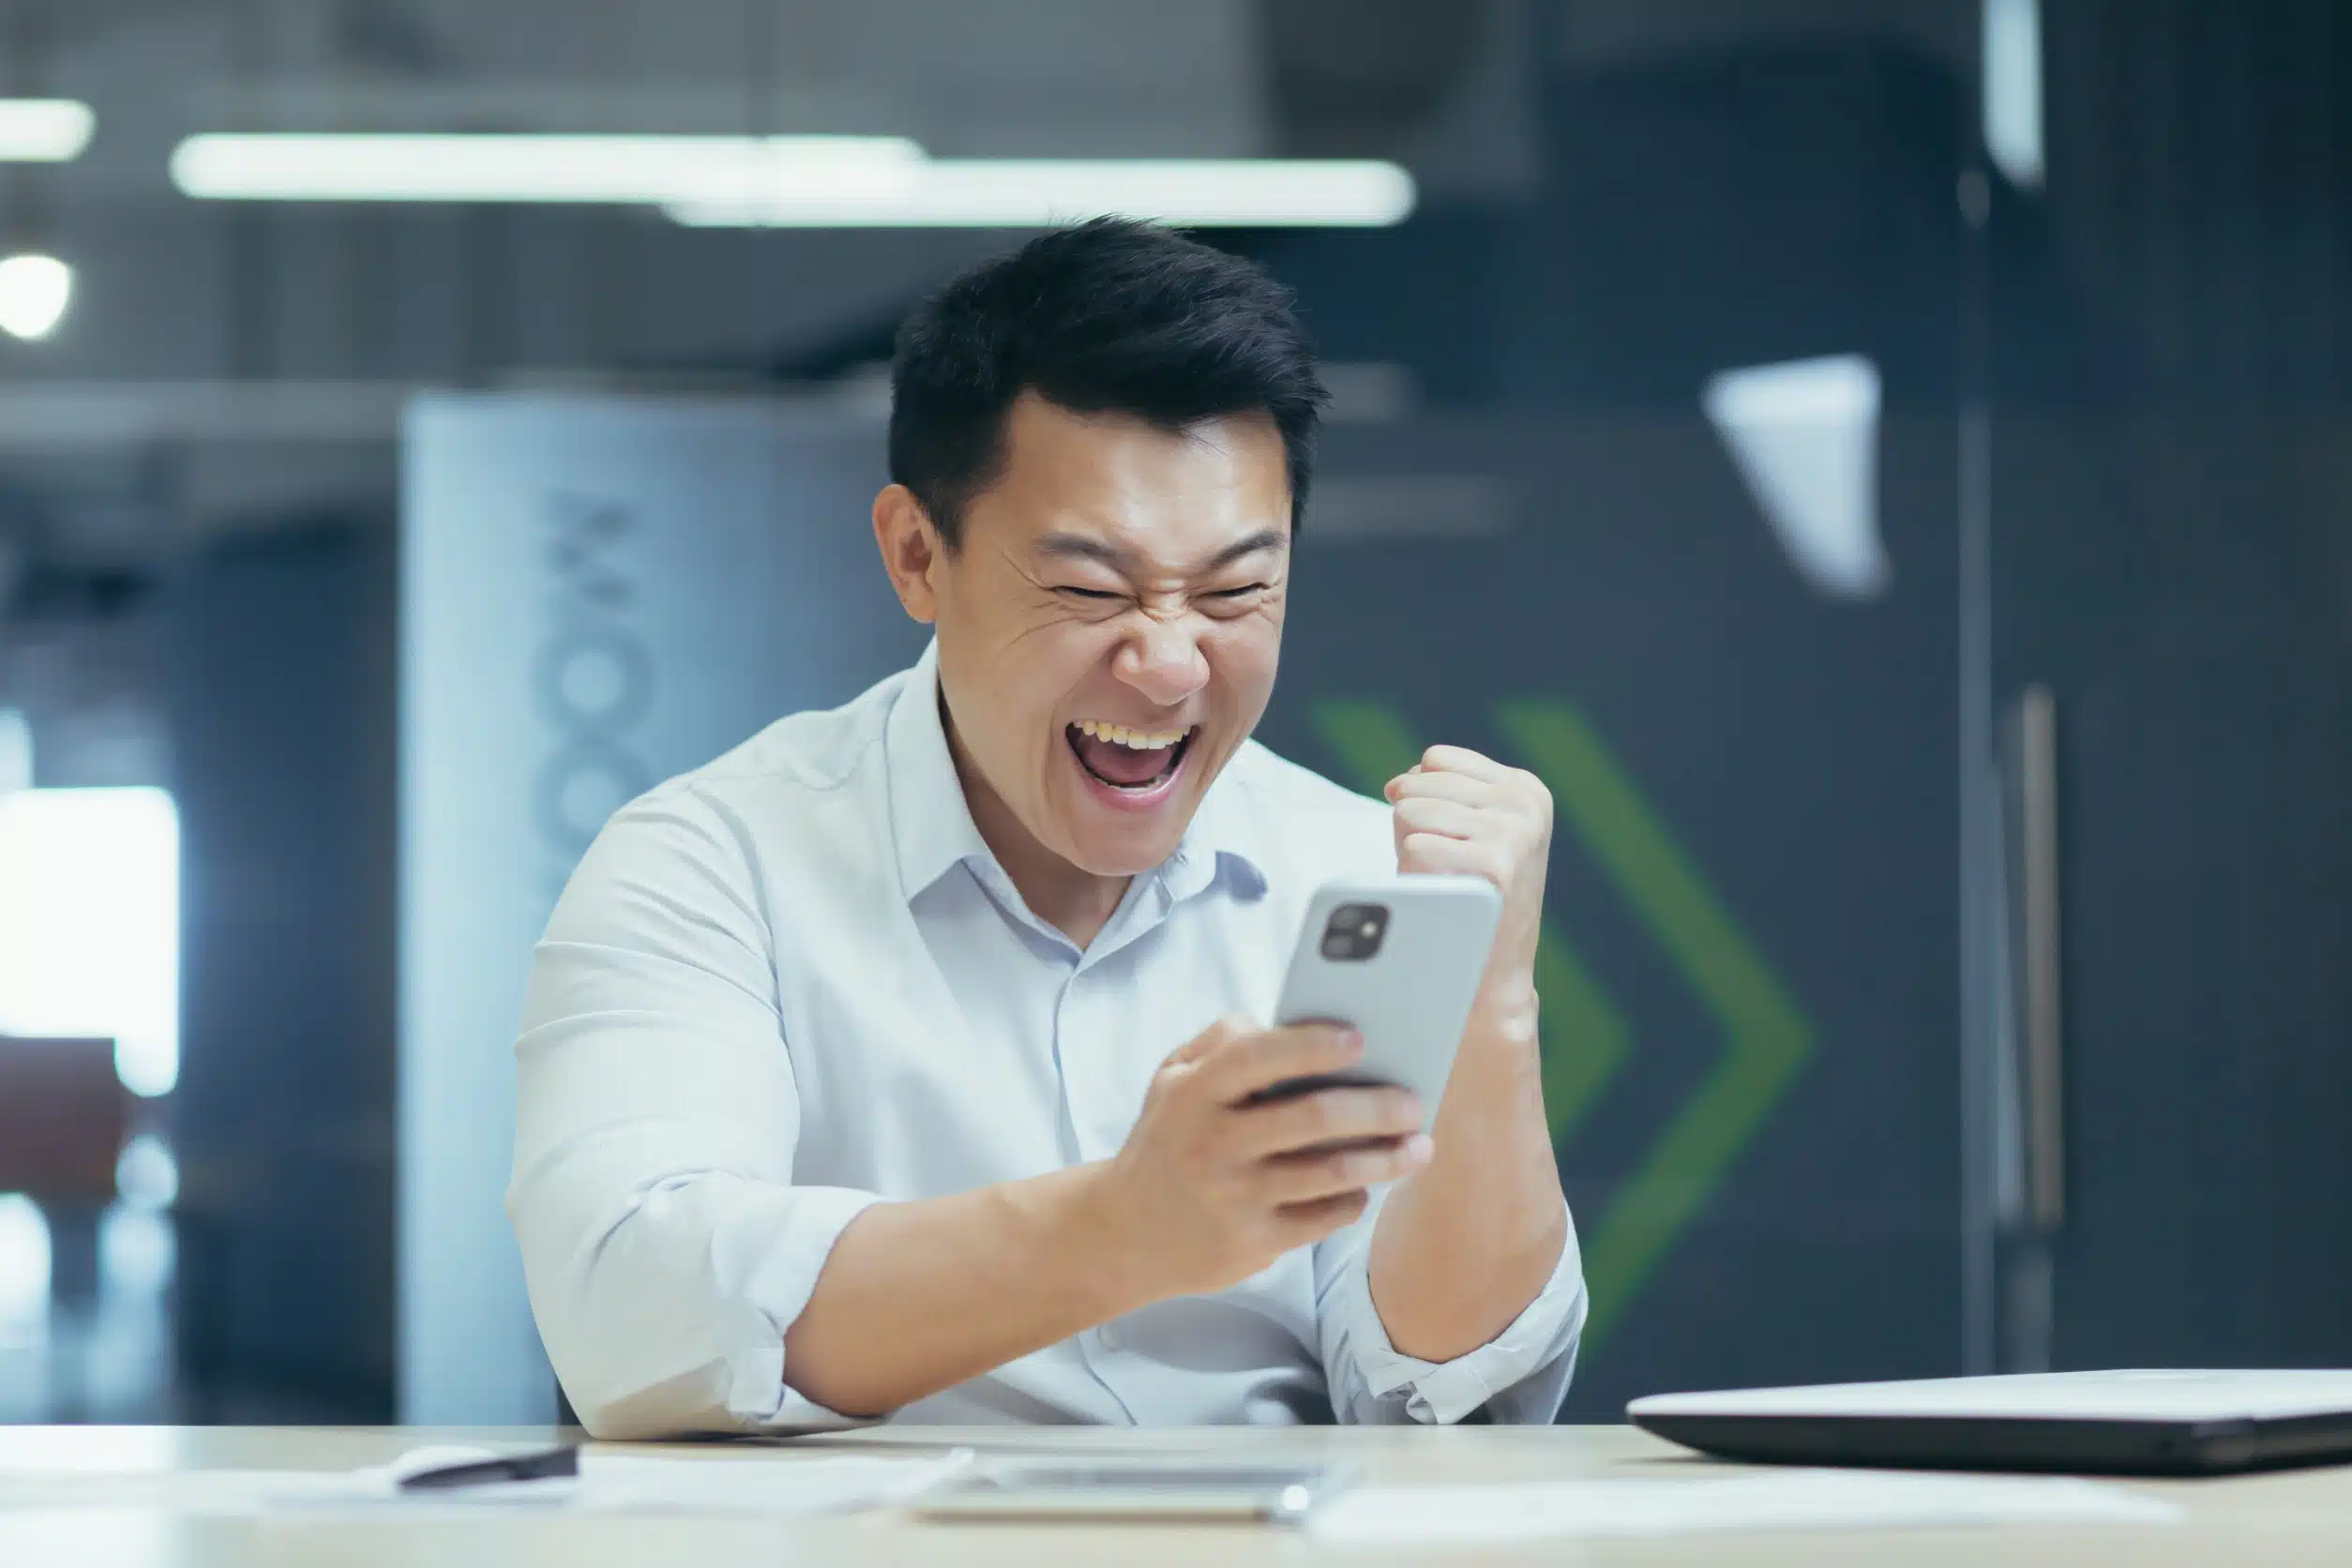 Man looking excitedly at phone